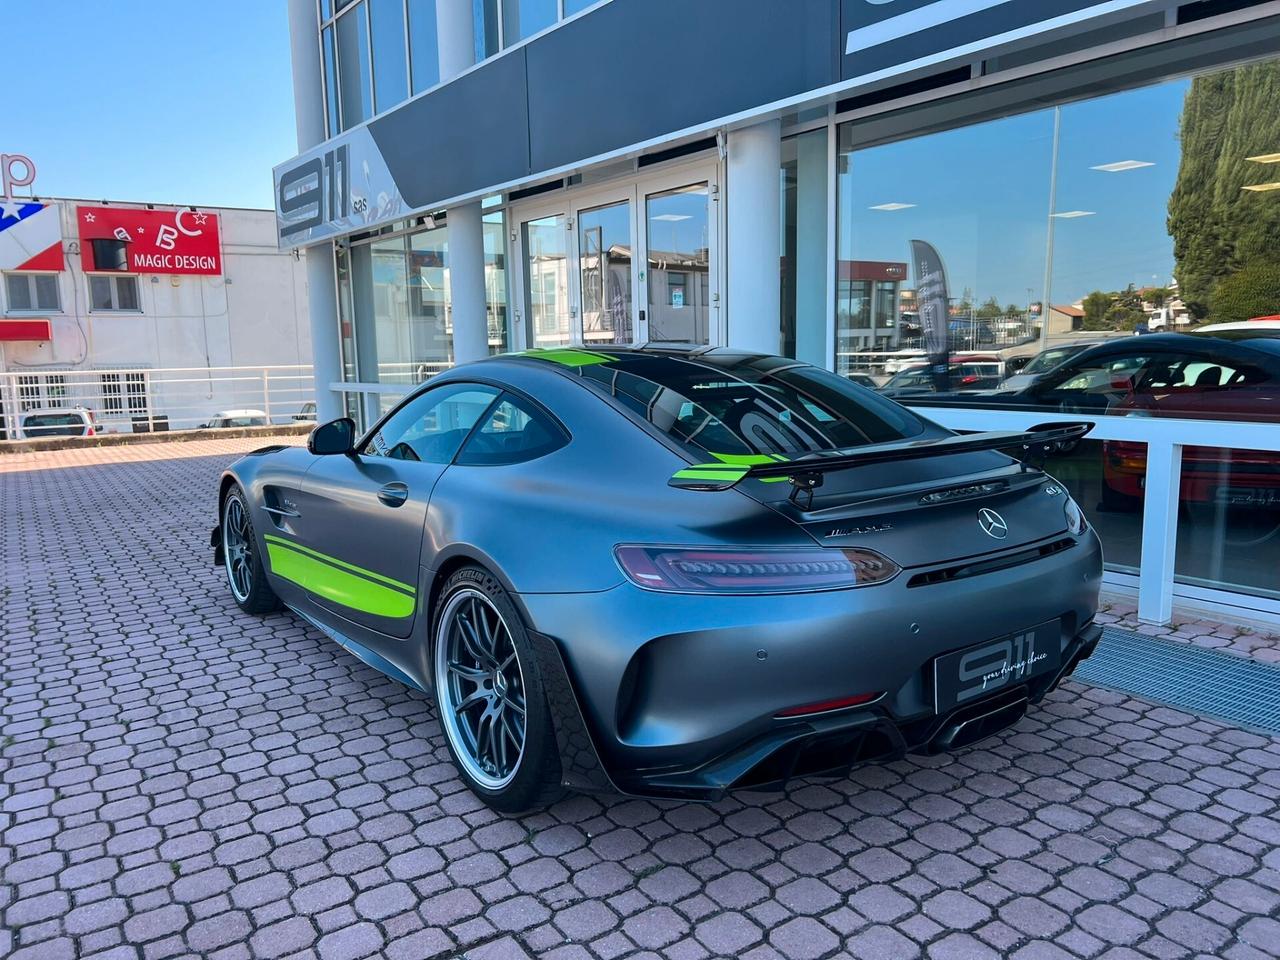 Mercedes-benz GT AMG AMG GT R PRO 1/750 Limited Edition